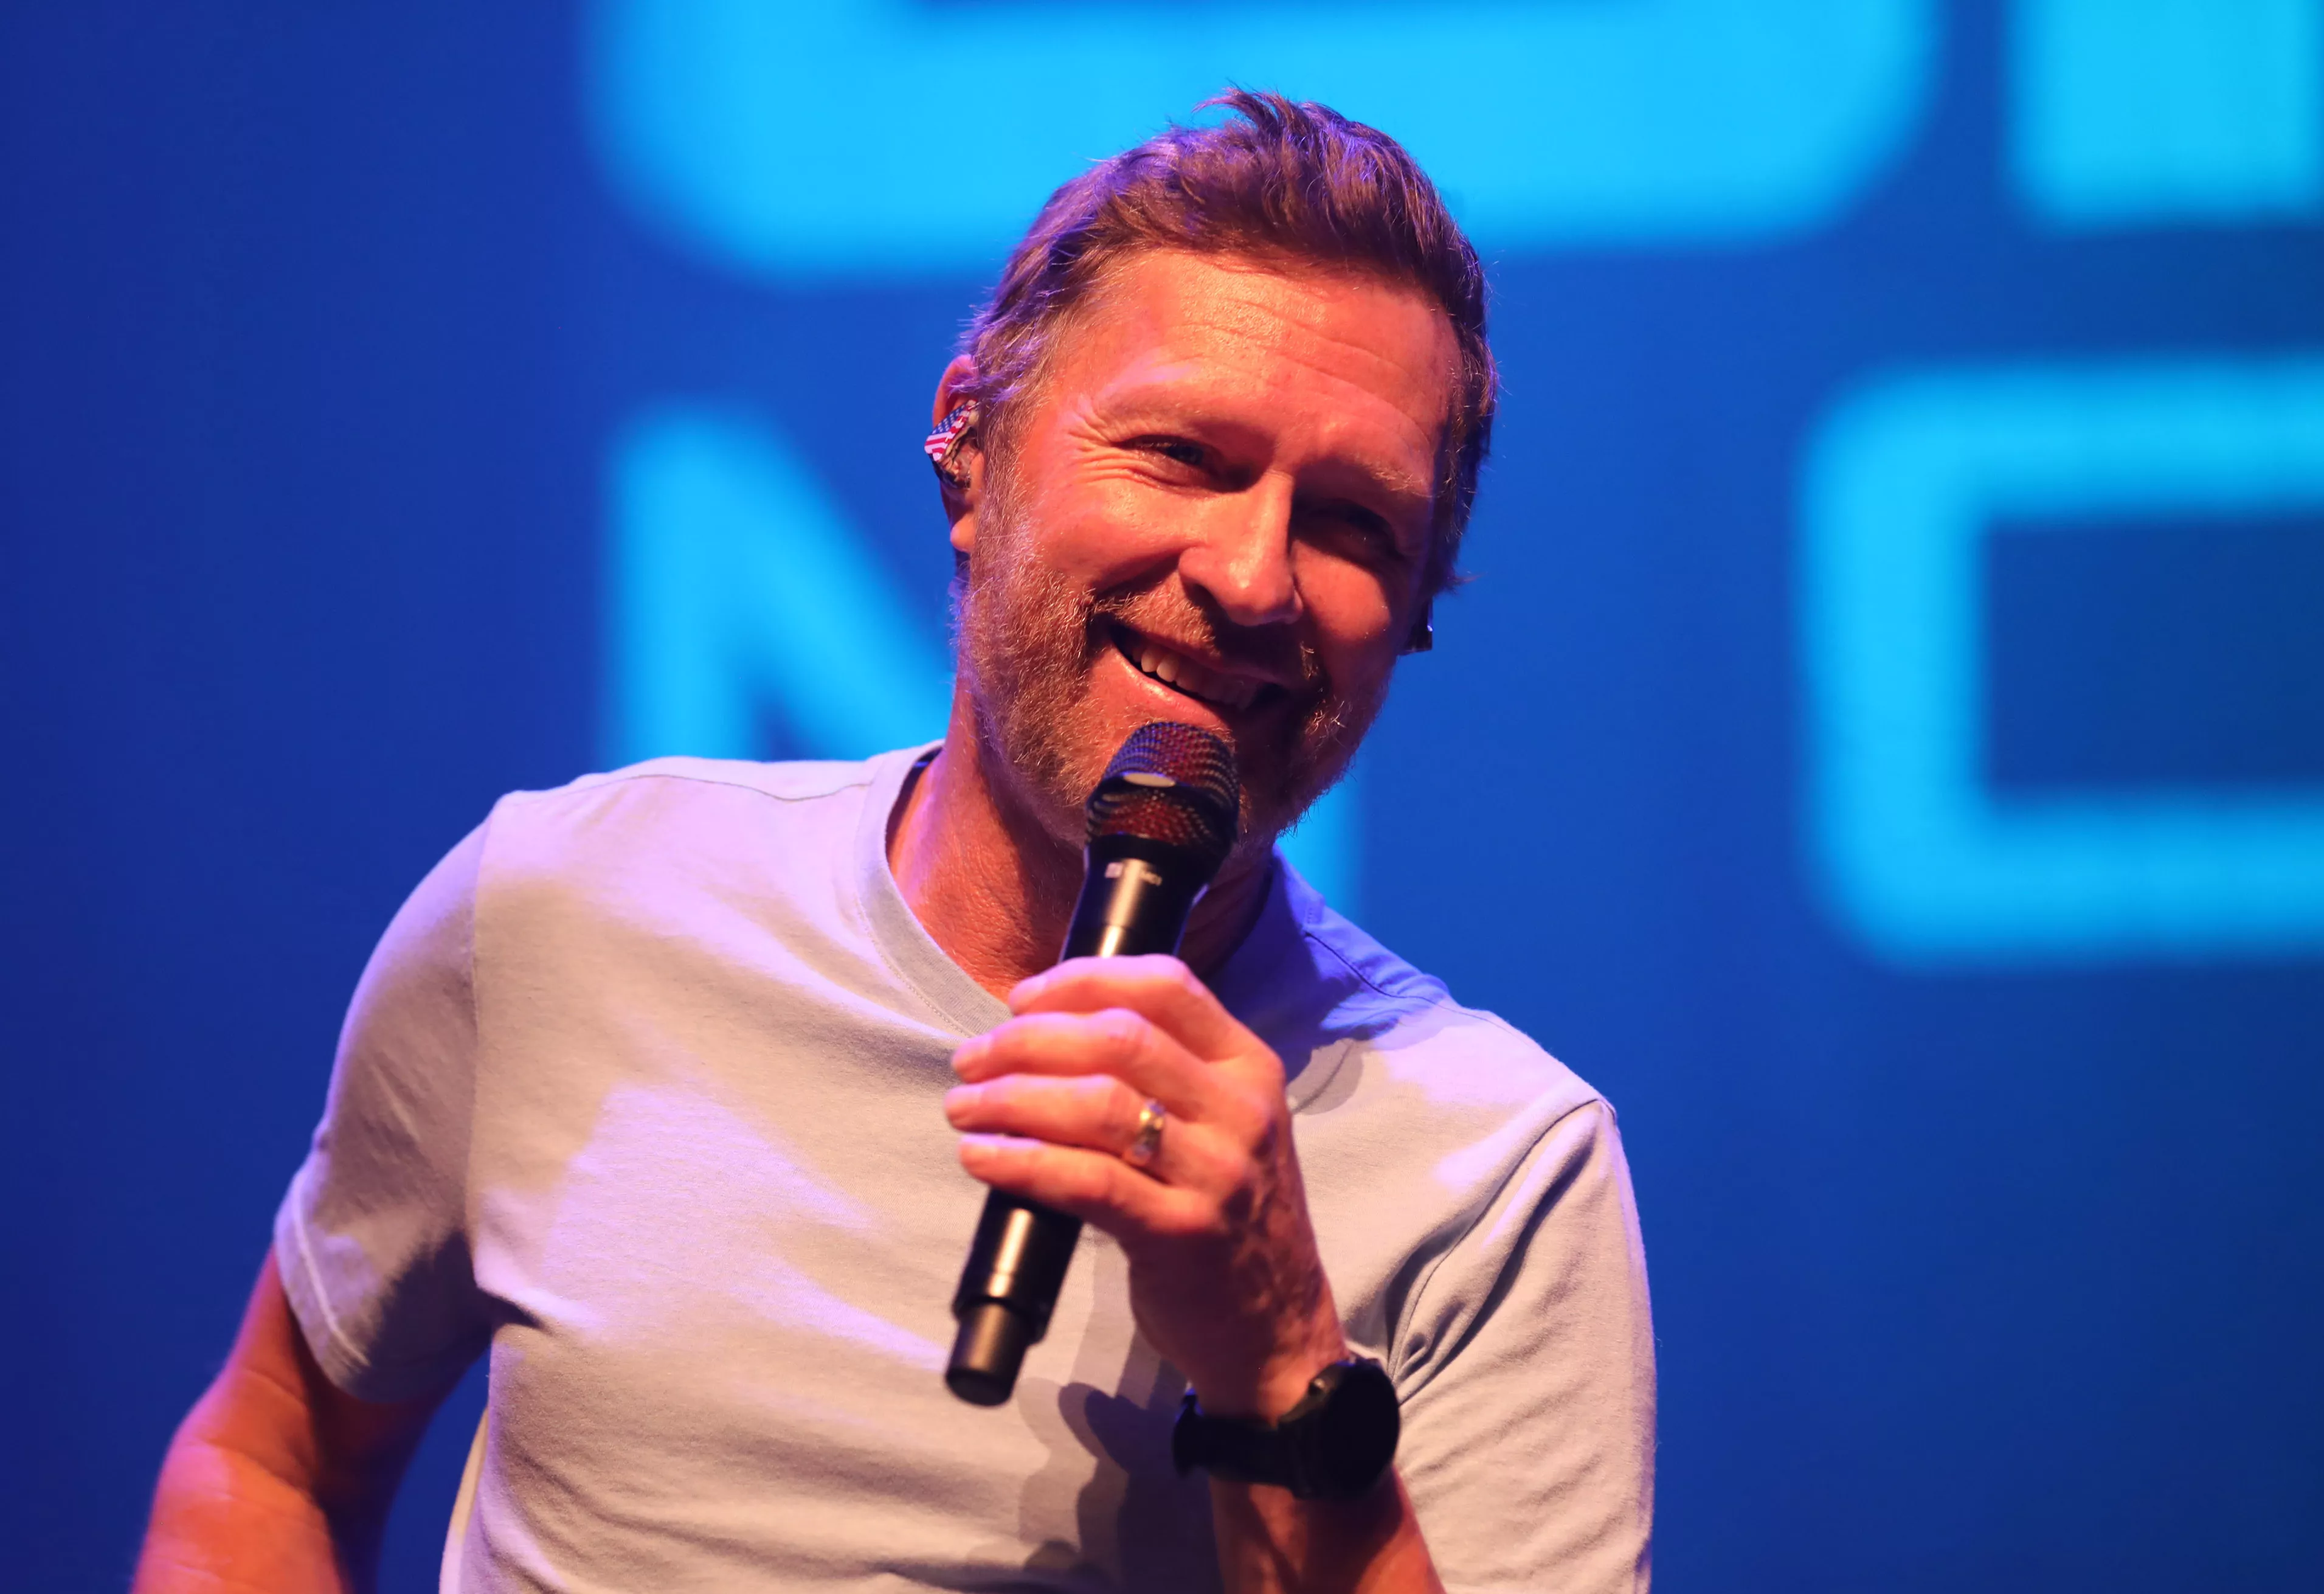 Craig Morgan smiling and holding microphone